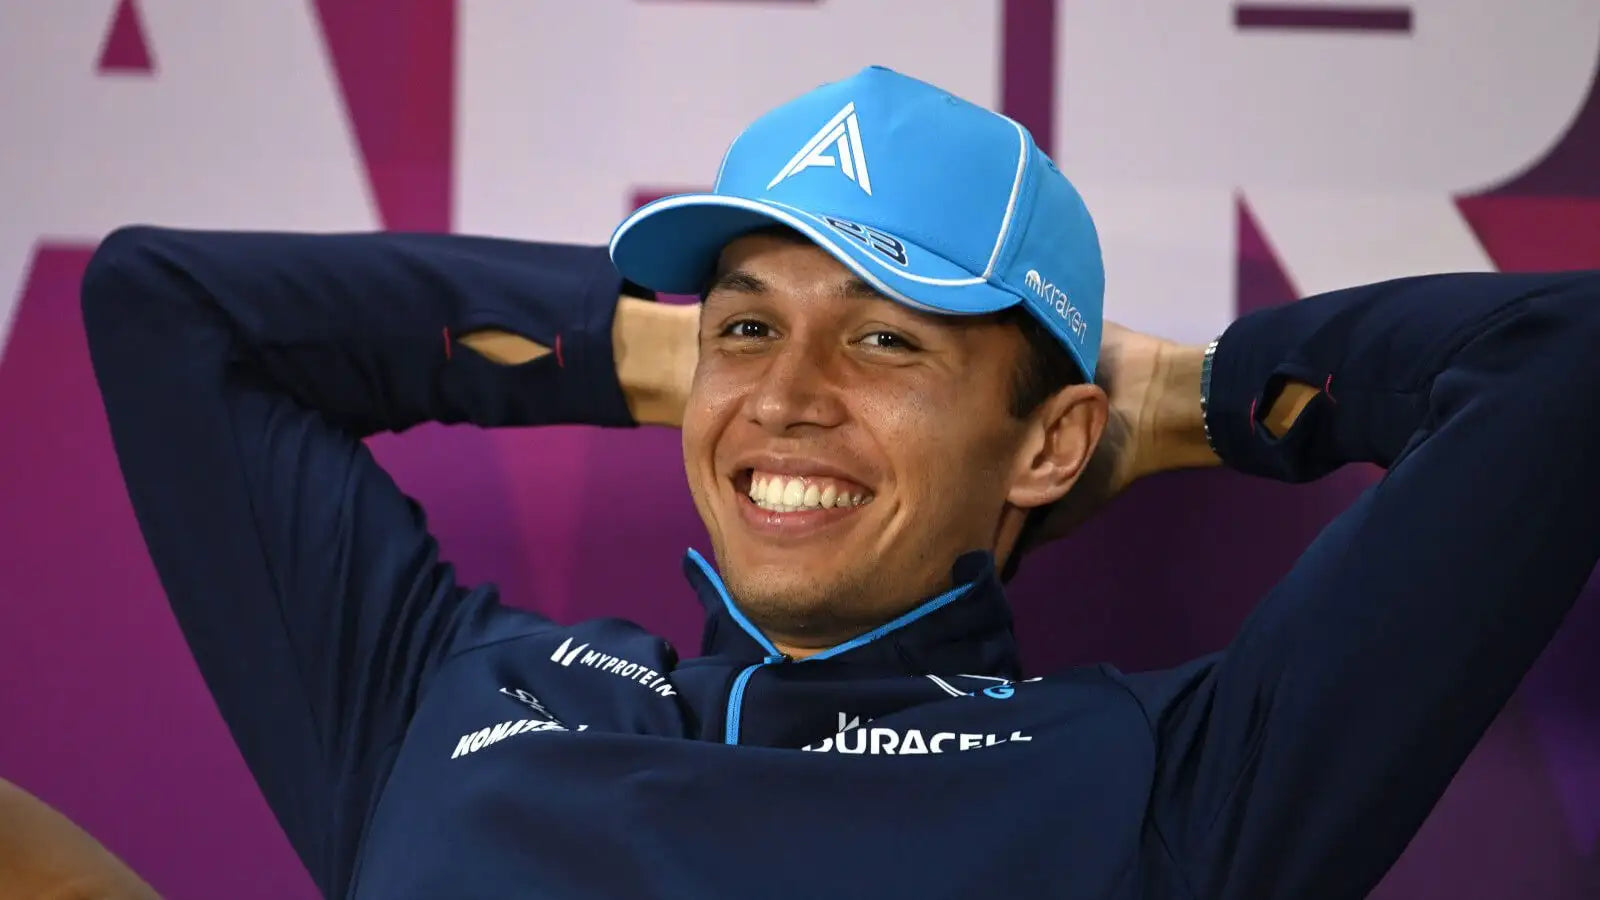 Alex Albon’s worrying prediction of a ’25-second lead’ and a ‘lap record’